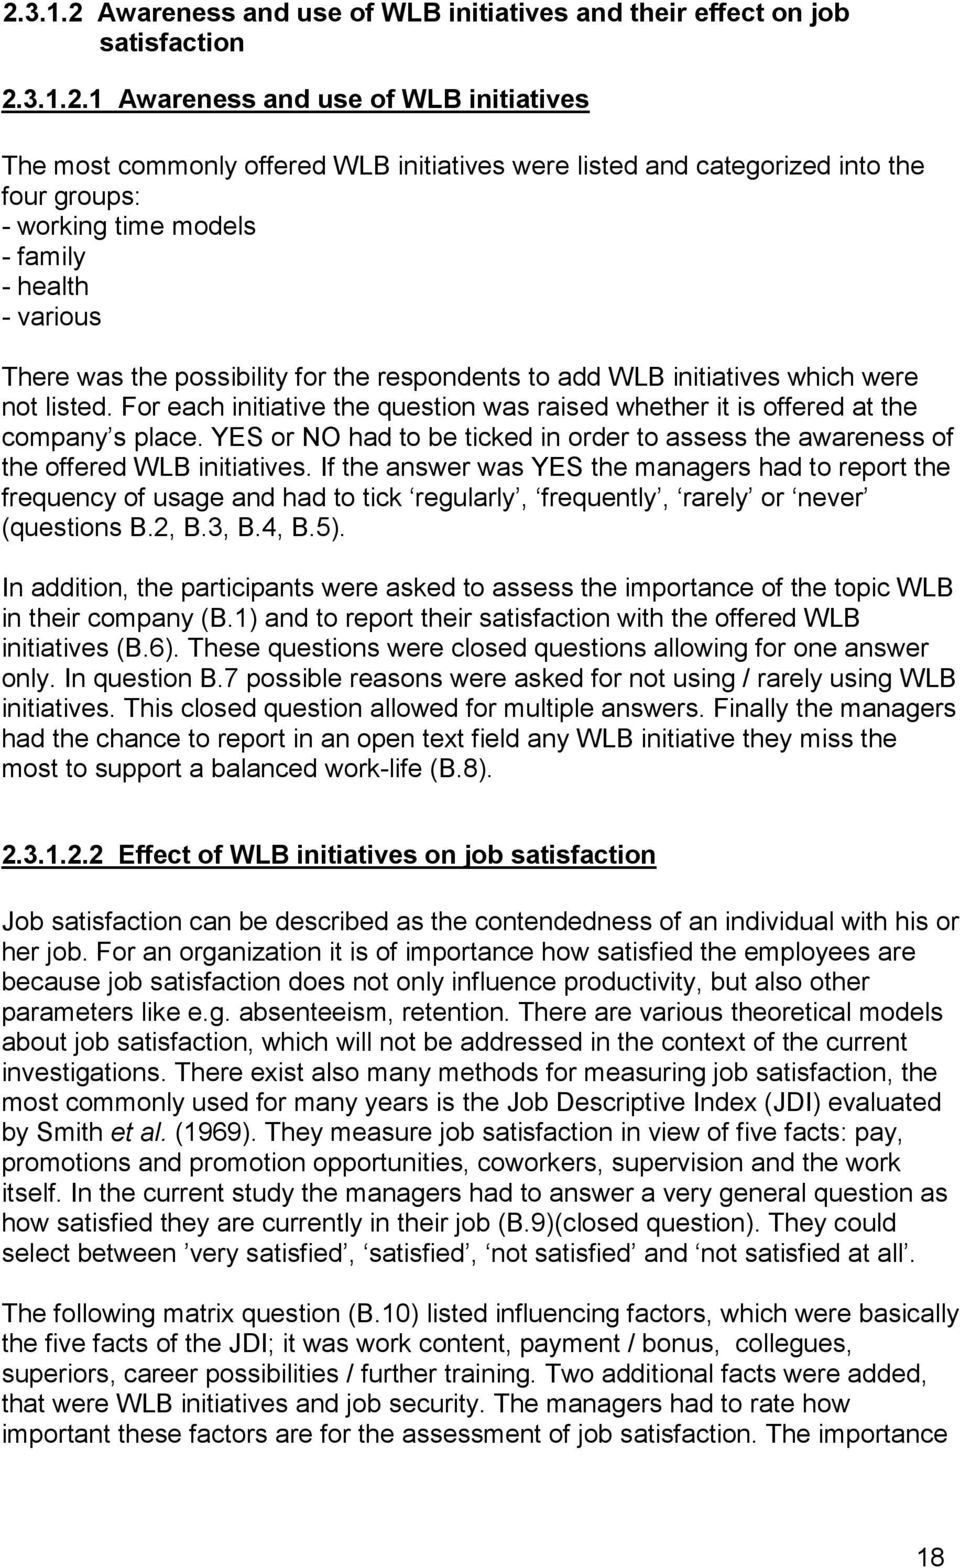 For each initiative the question was raised whether it is offered at the company s place. YES or N had to be ticked in order to assess the awareness of the offered WLB initiatives.